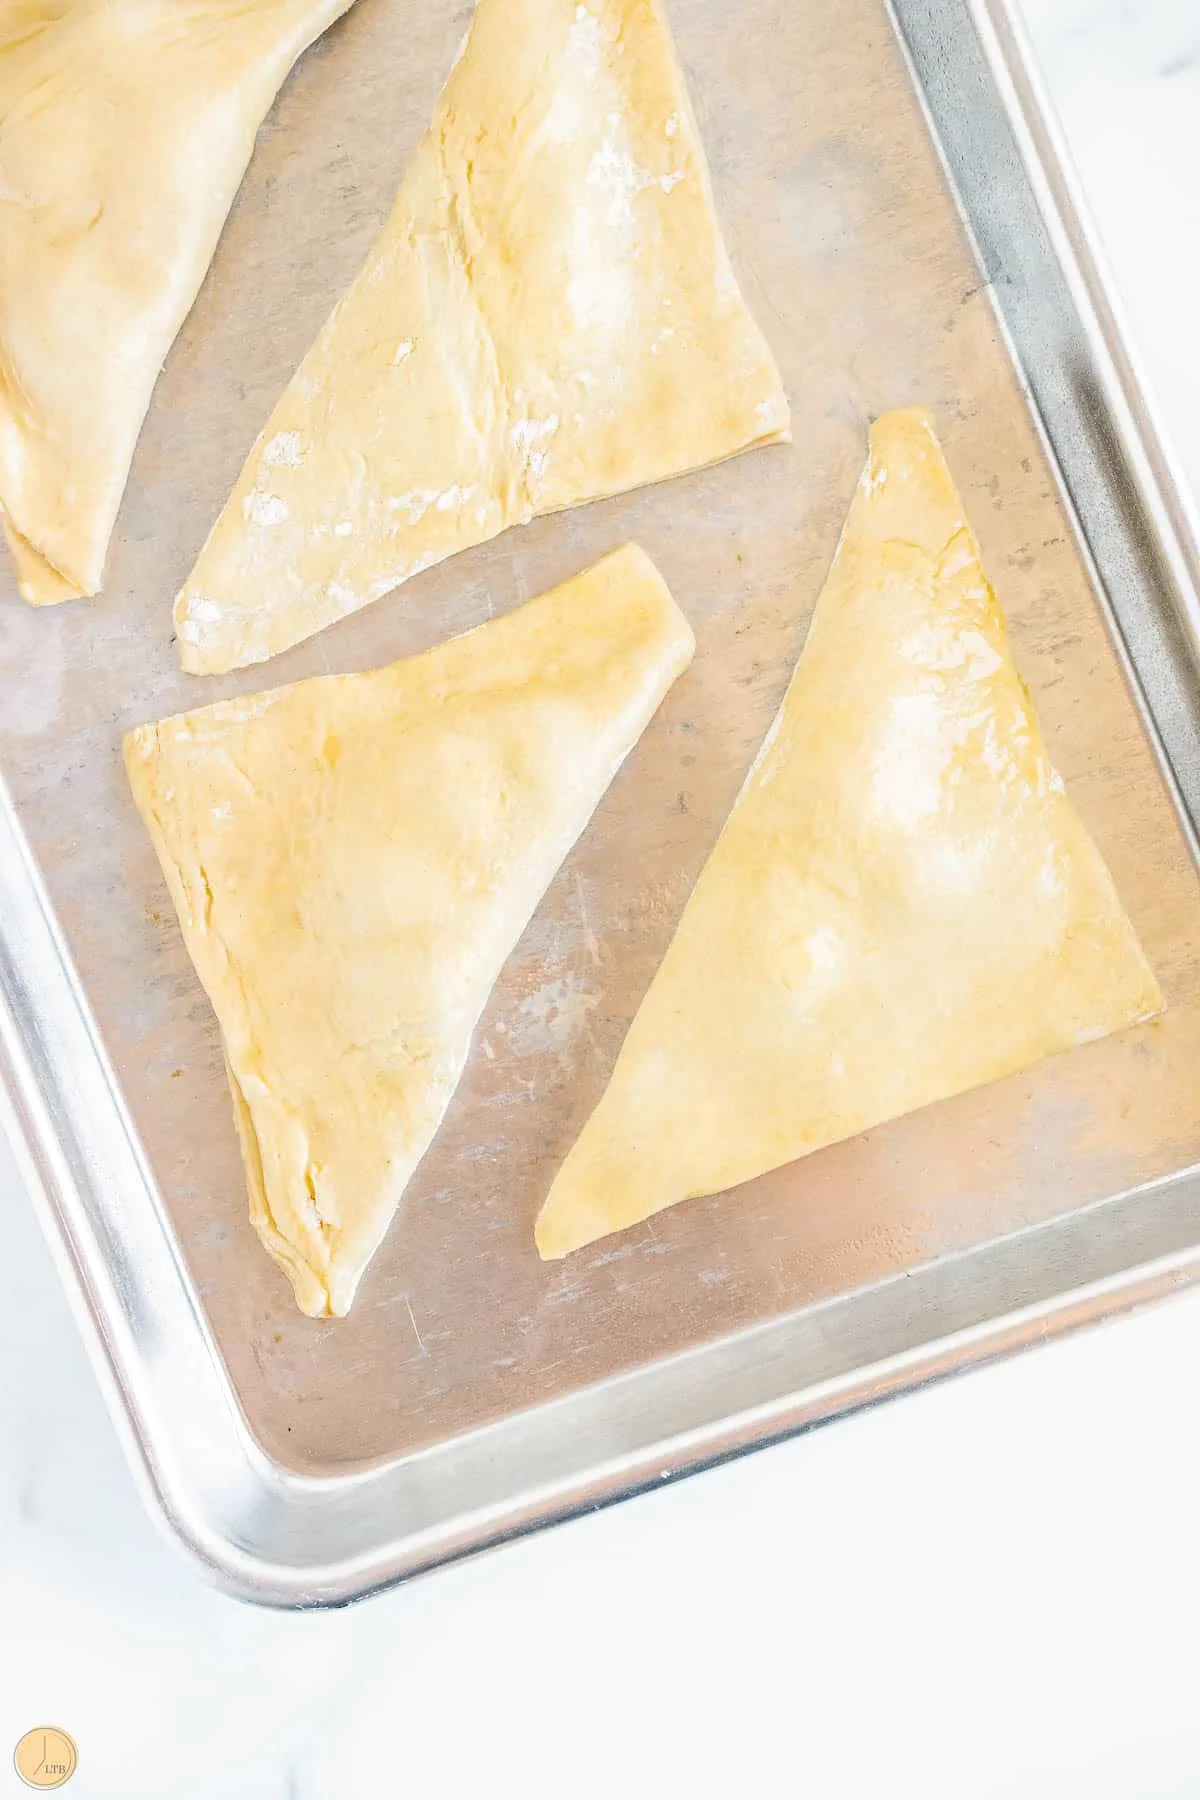 unbaked turnovers on a metal sheet pan